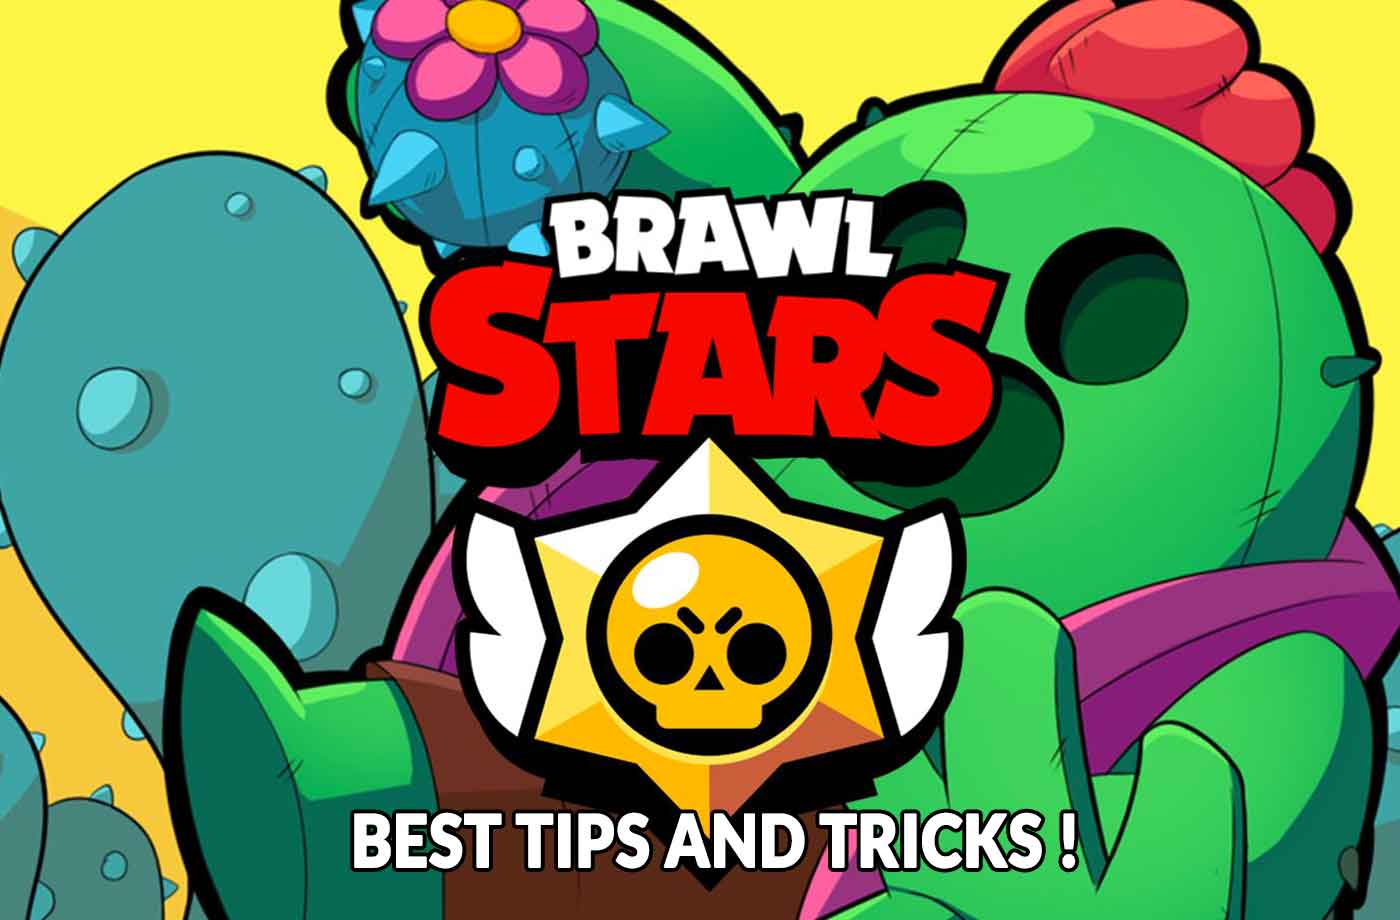 Guide Brawl Stars Tips And Hints To Understand The New Game Of Supercell Kill The Game - brawl star sur jeux jeux jeux